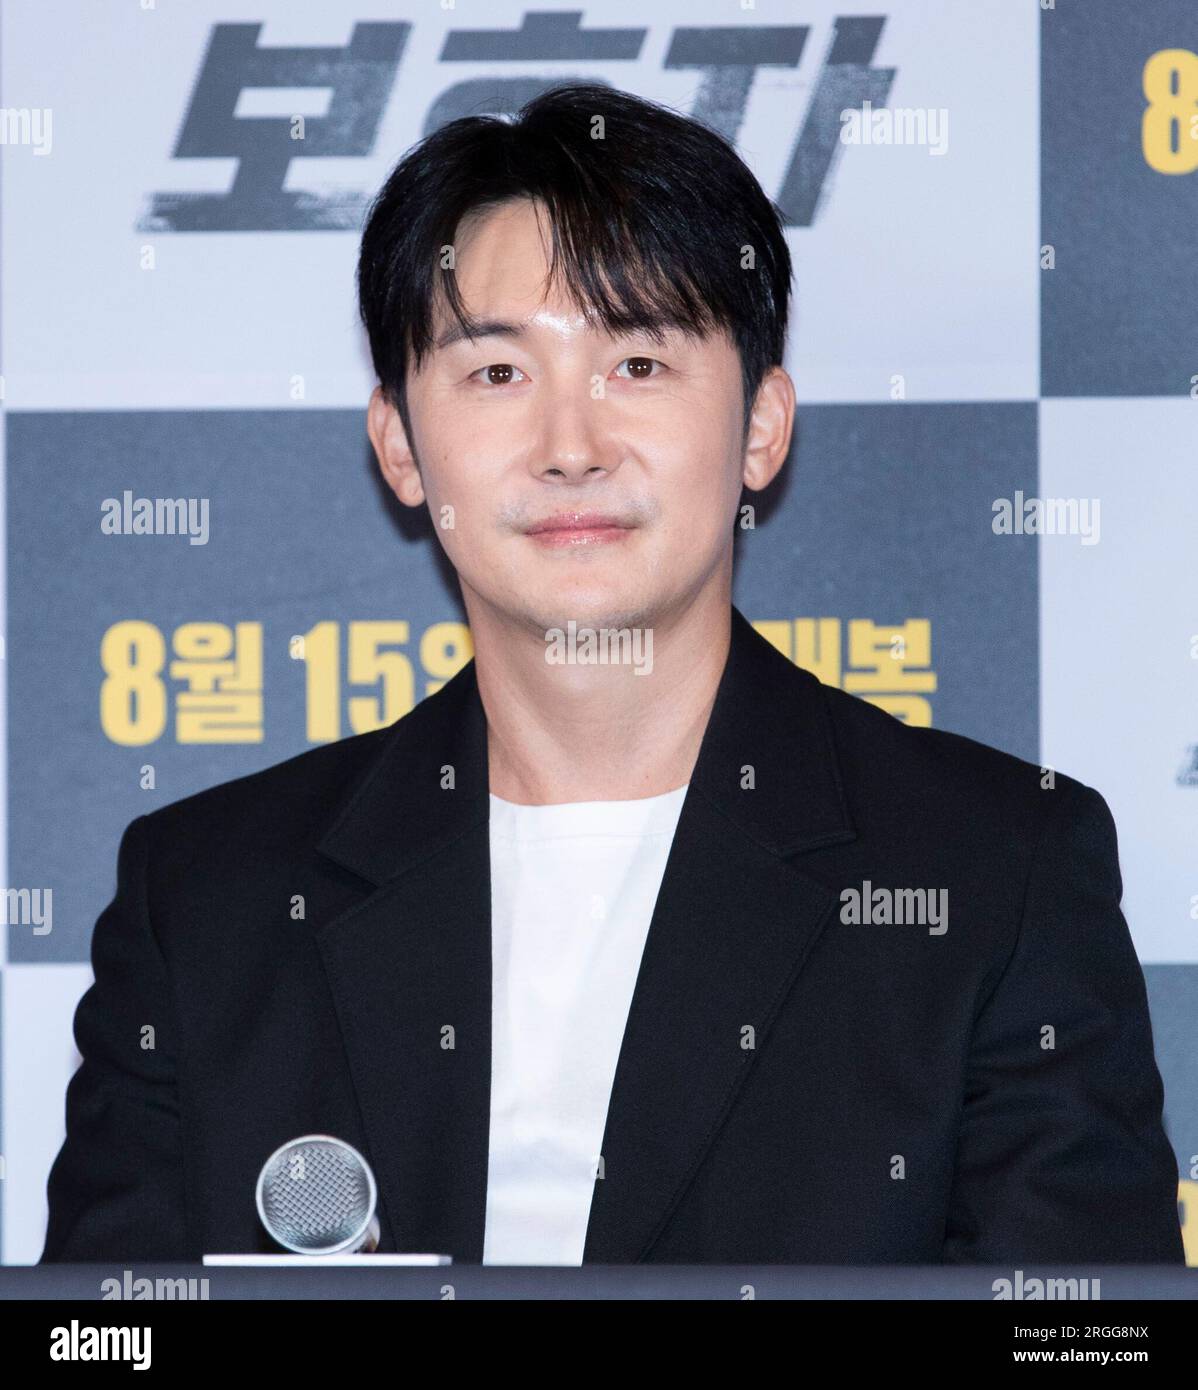 Seoul, South Korea. 9th Aug, 2023. South Korean actor Kim Jun-han, photocall for the Film ‘A Man of Reason' Premiere in Seoul, South Korea on August 9, 2023. The film will open on August 15. (Photo by Lee Young-ho/Sipa USA) Credit: Sipa USA/Alamy Live News Stock Photo